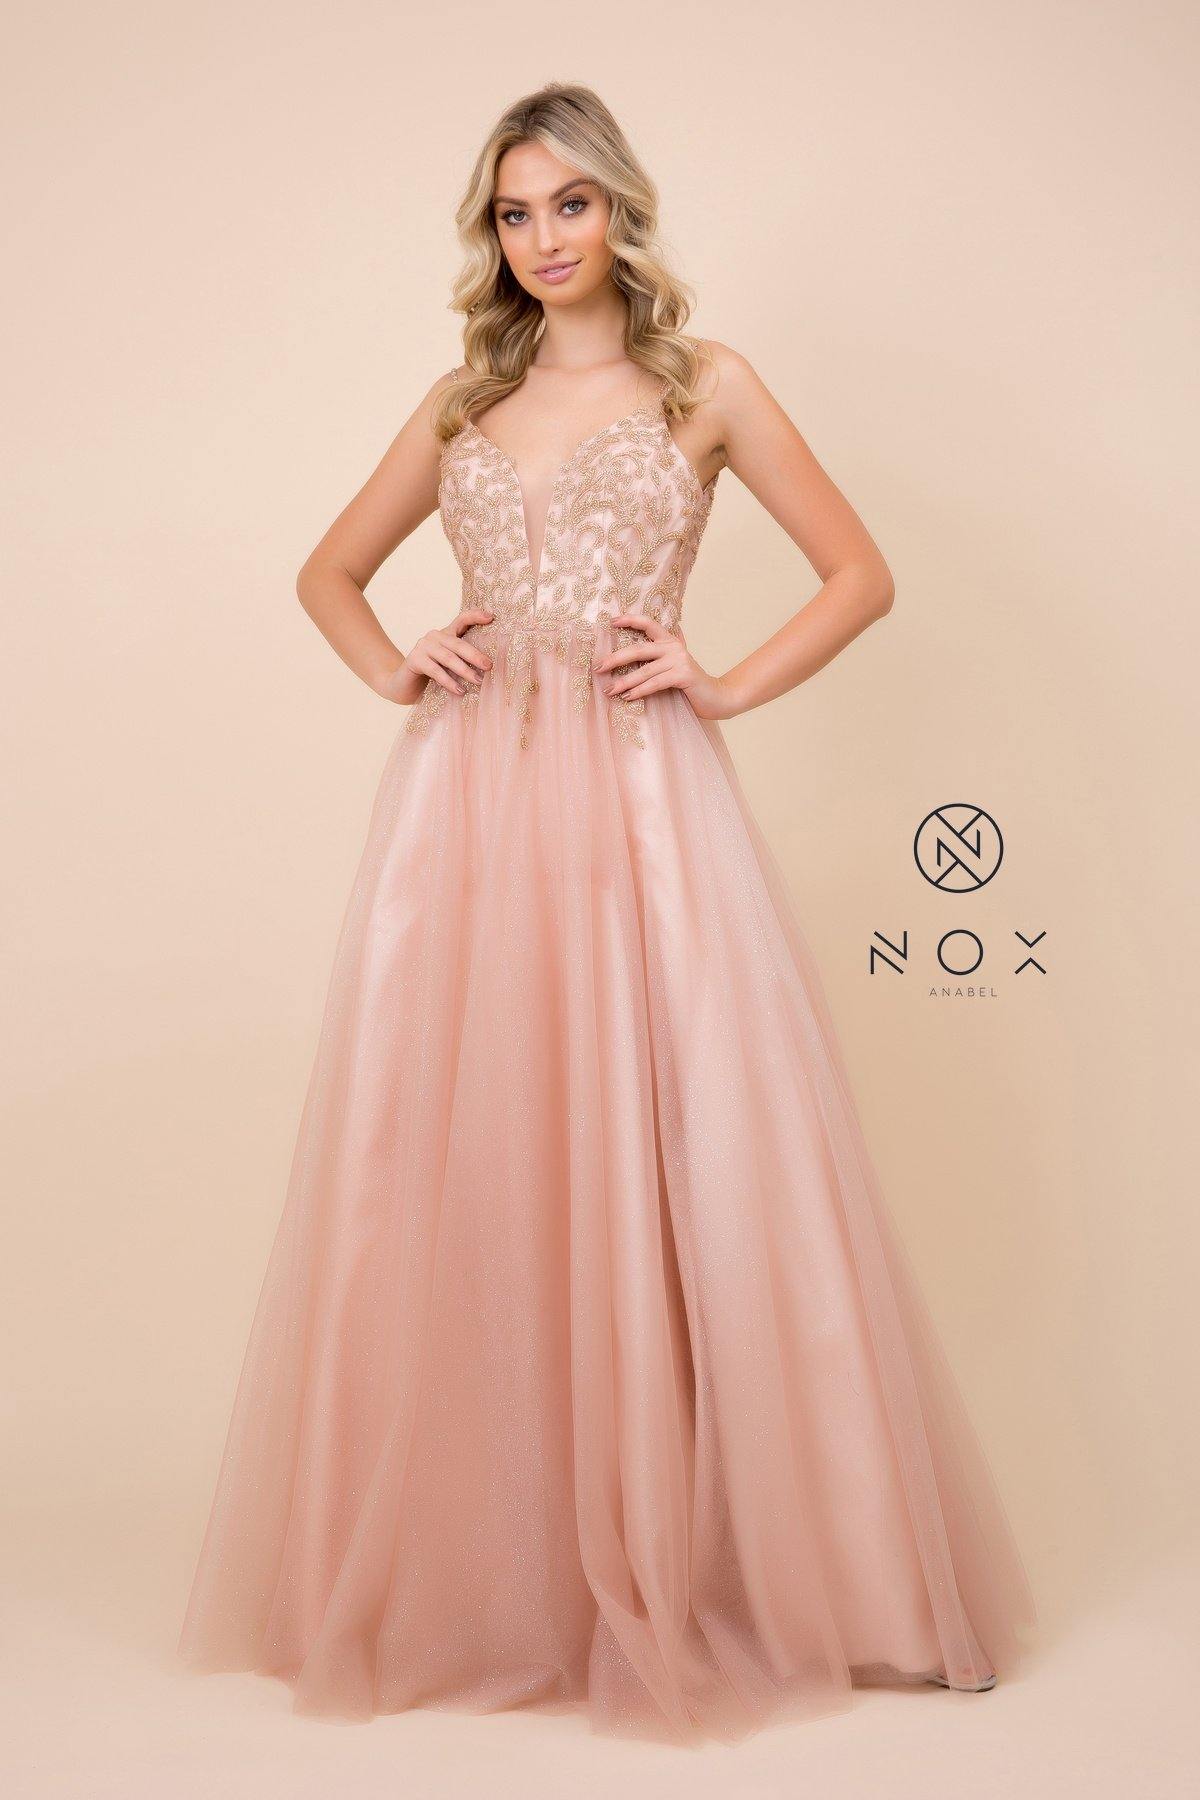 Long A-Line Glitter Prom Dress Evening Gown - The Dress Outlet Nox Anabel